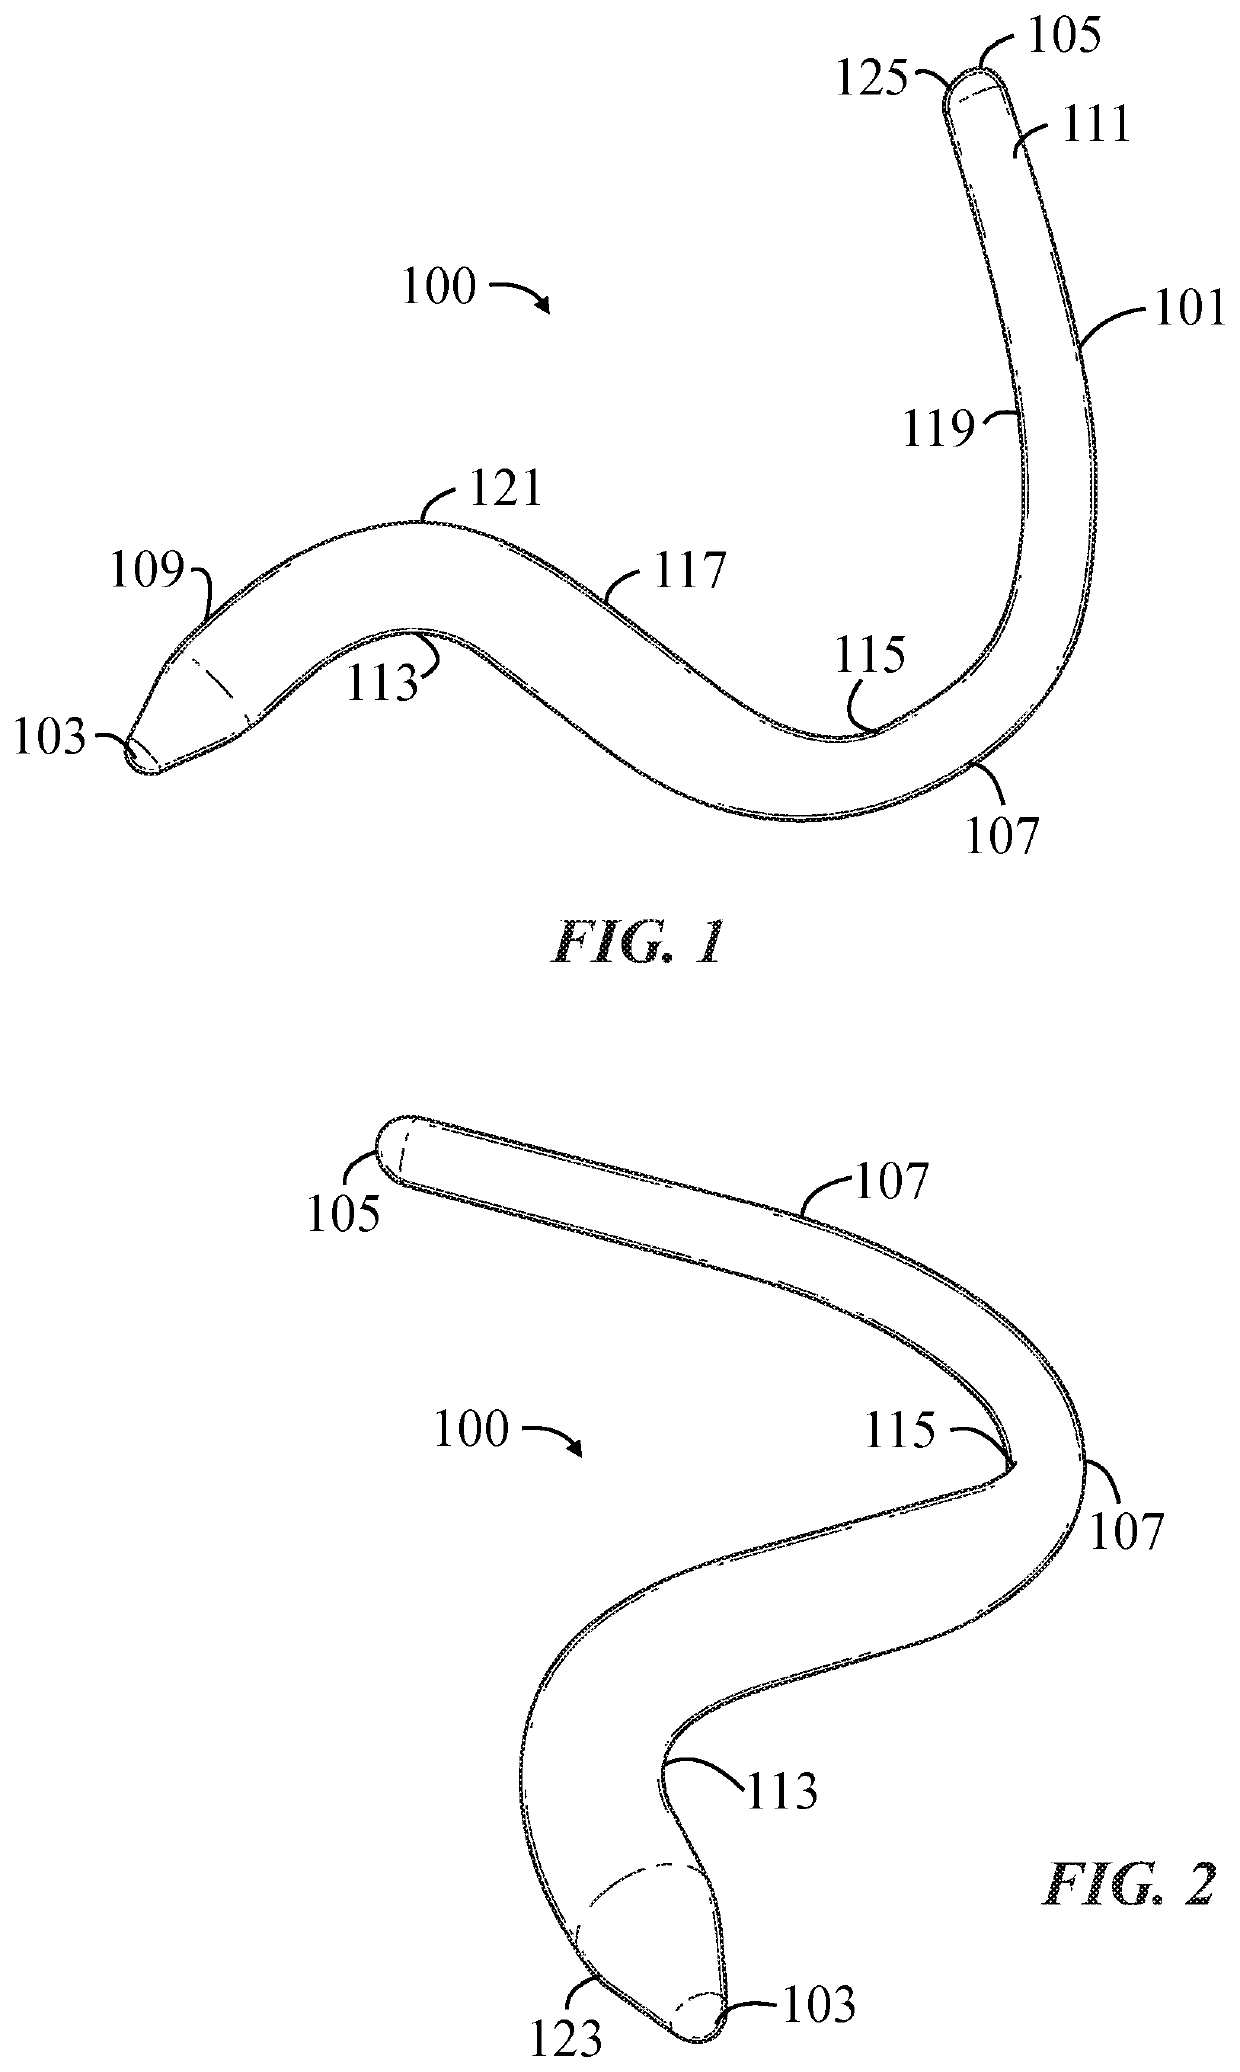 Apparatus for pelvic floor muscle trigger point therapy